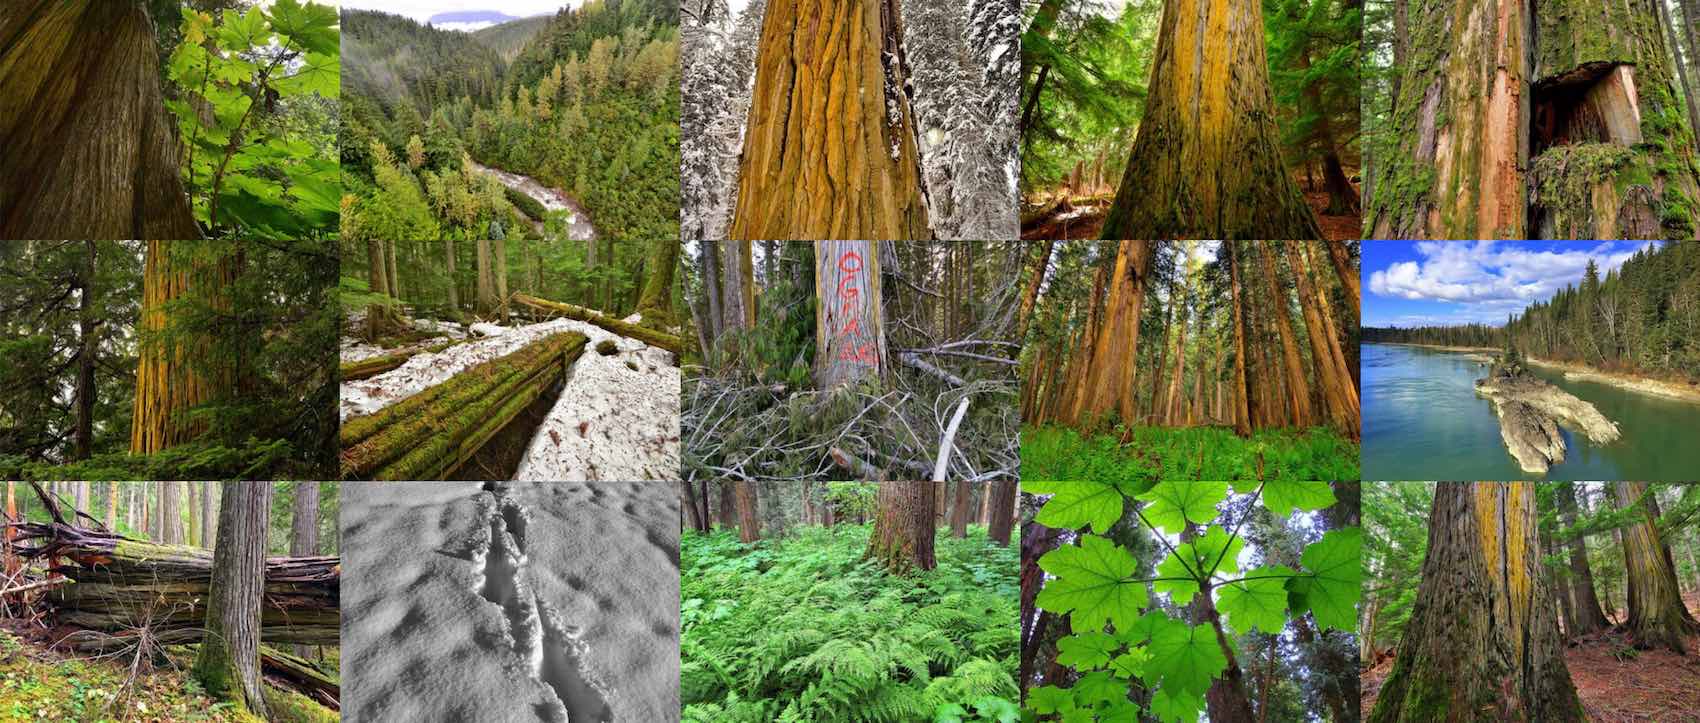 The Last Old-Growth Forests Are Being Logged in Western Canada